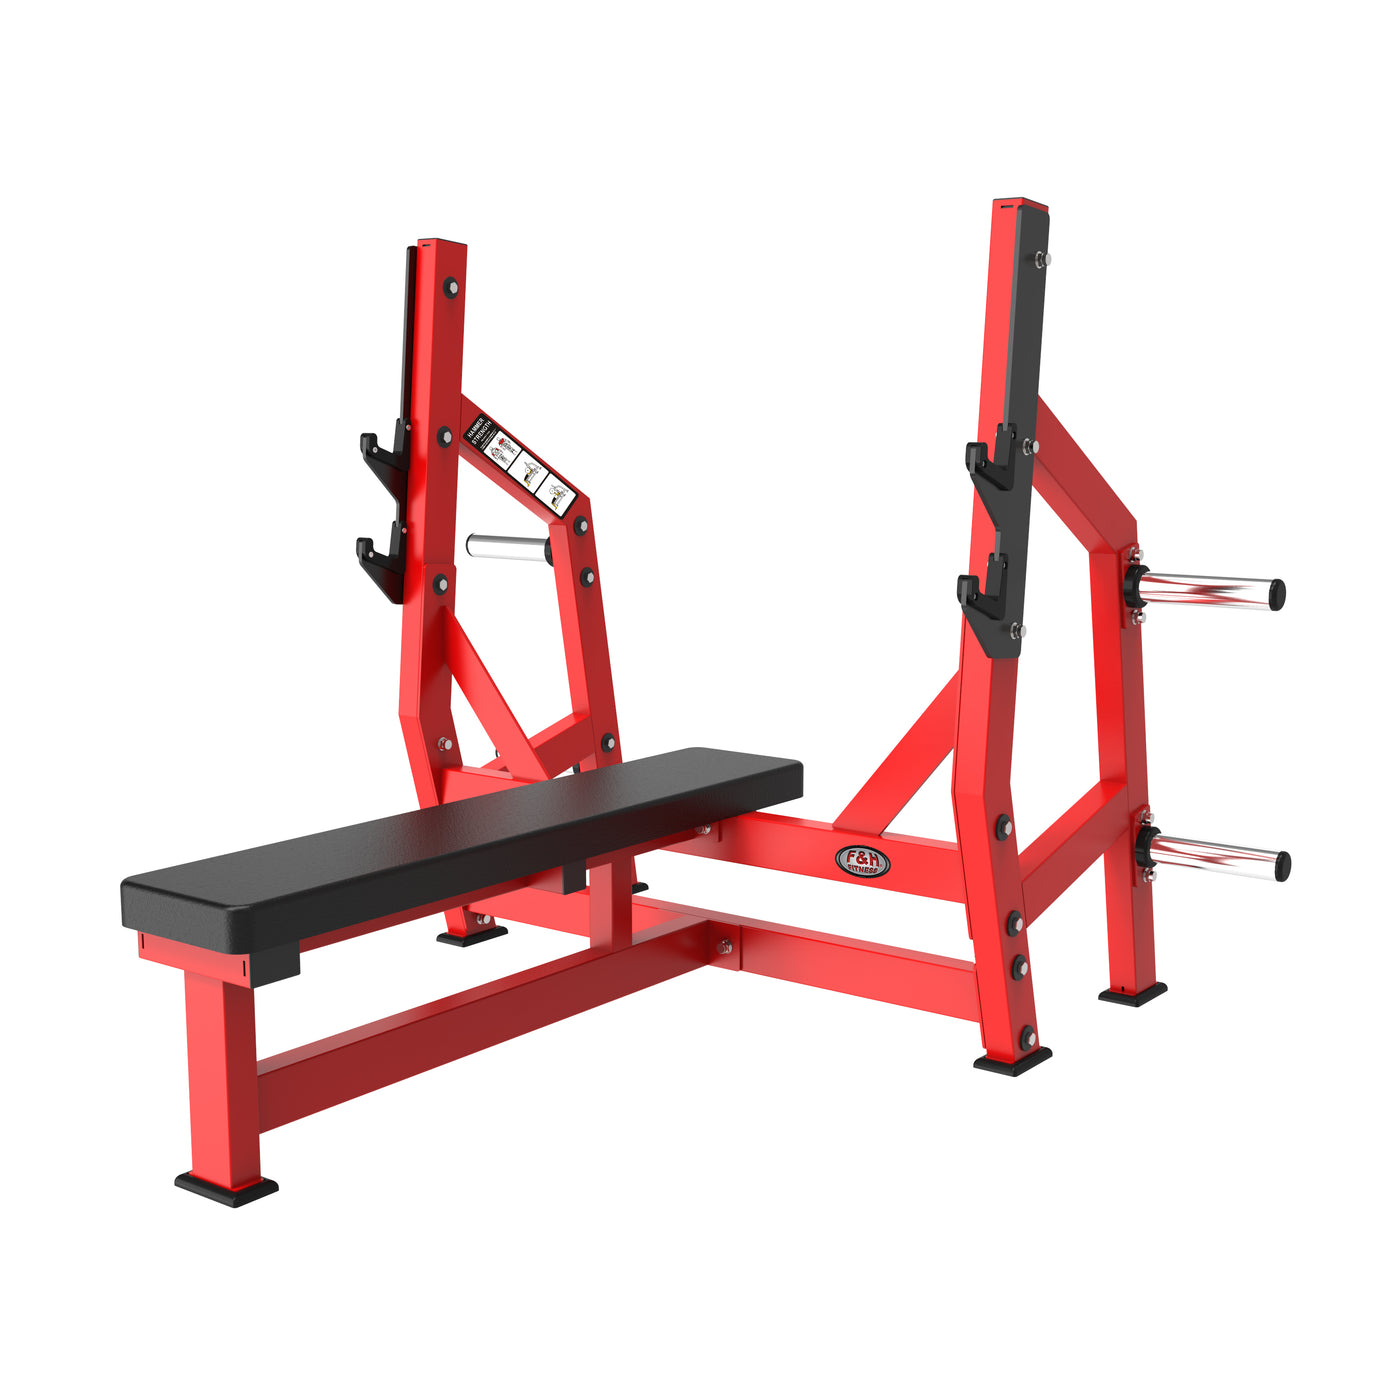 IF 38 FLAT OLYMPIC BENCH